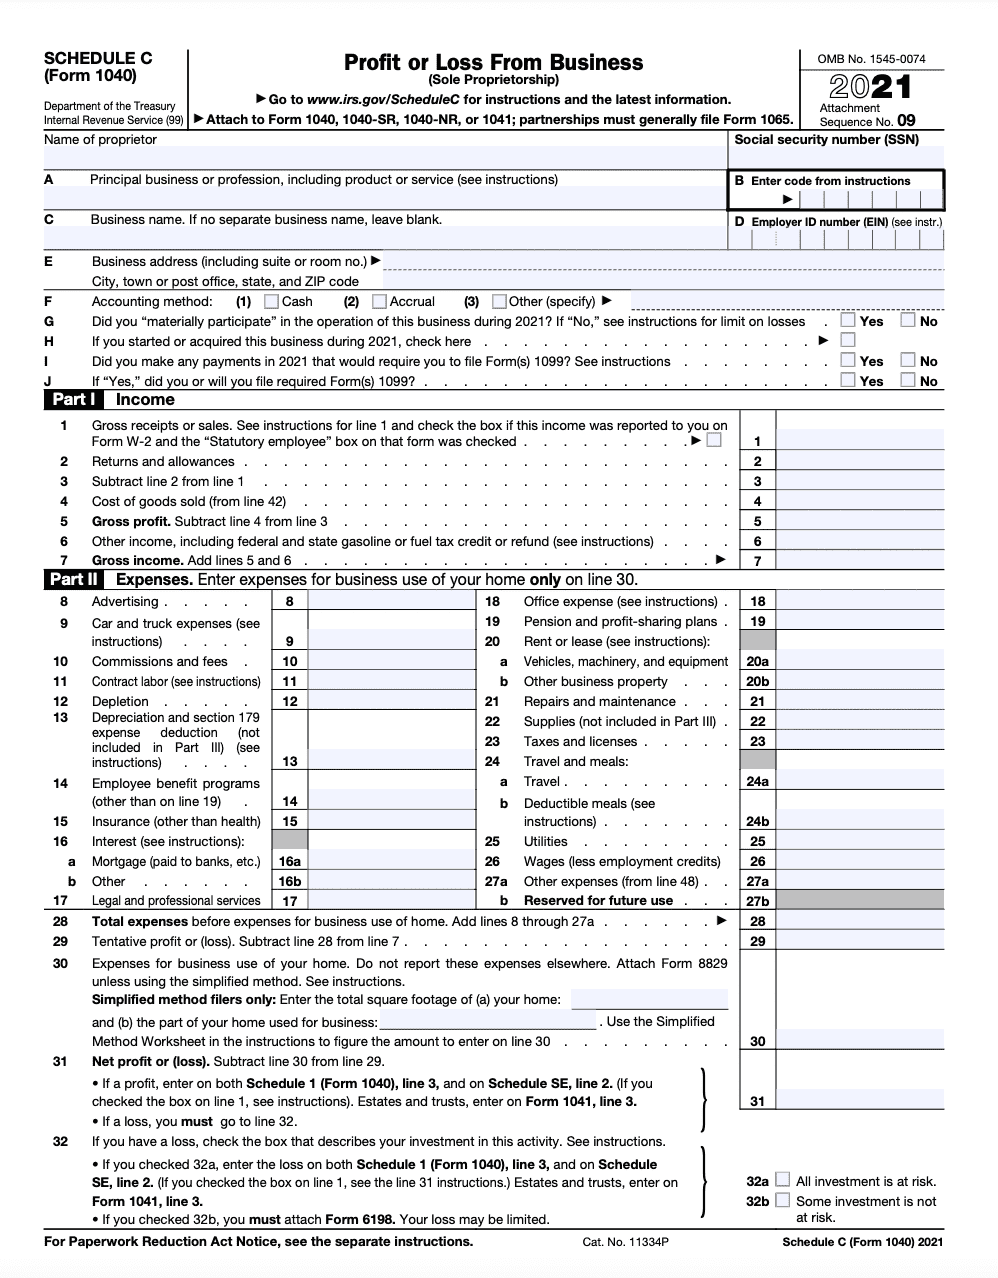 Image of Schedule C form for self-employed individuals to report profit or loss from business, including expenses such as taxes, 1099 payments, and depreciation.